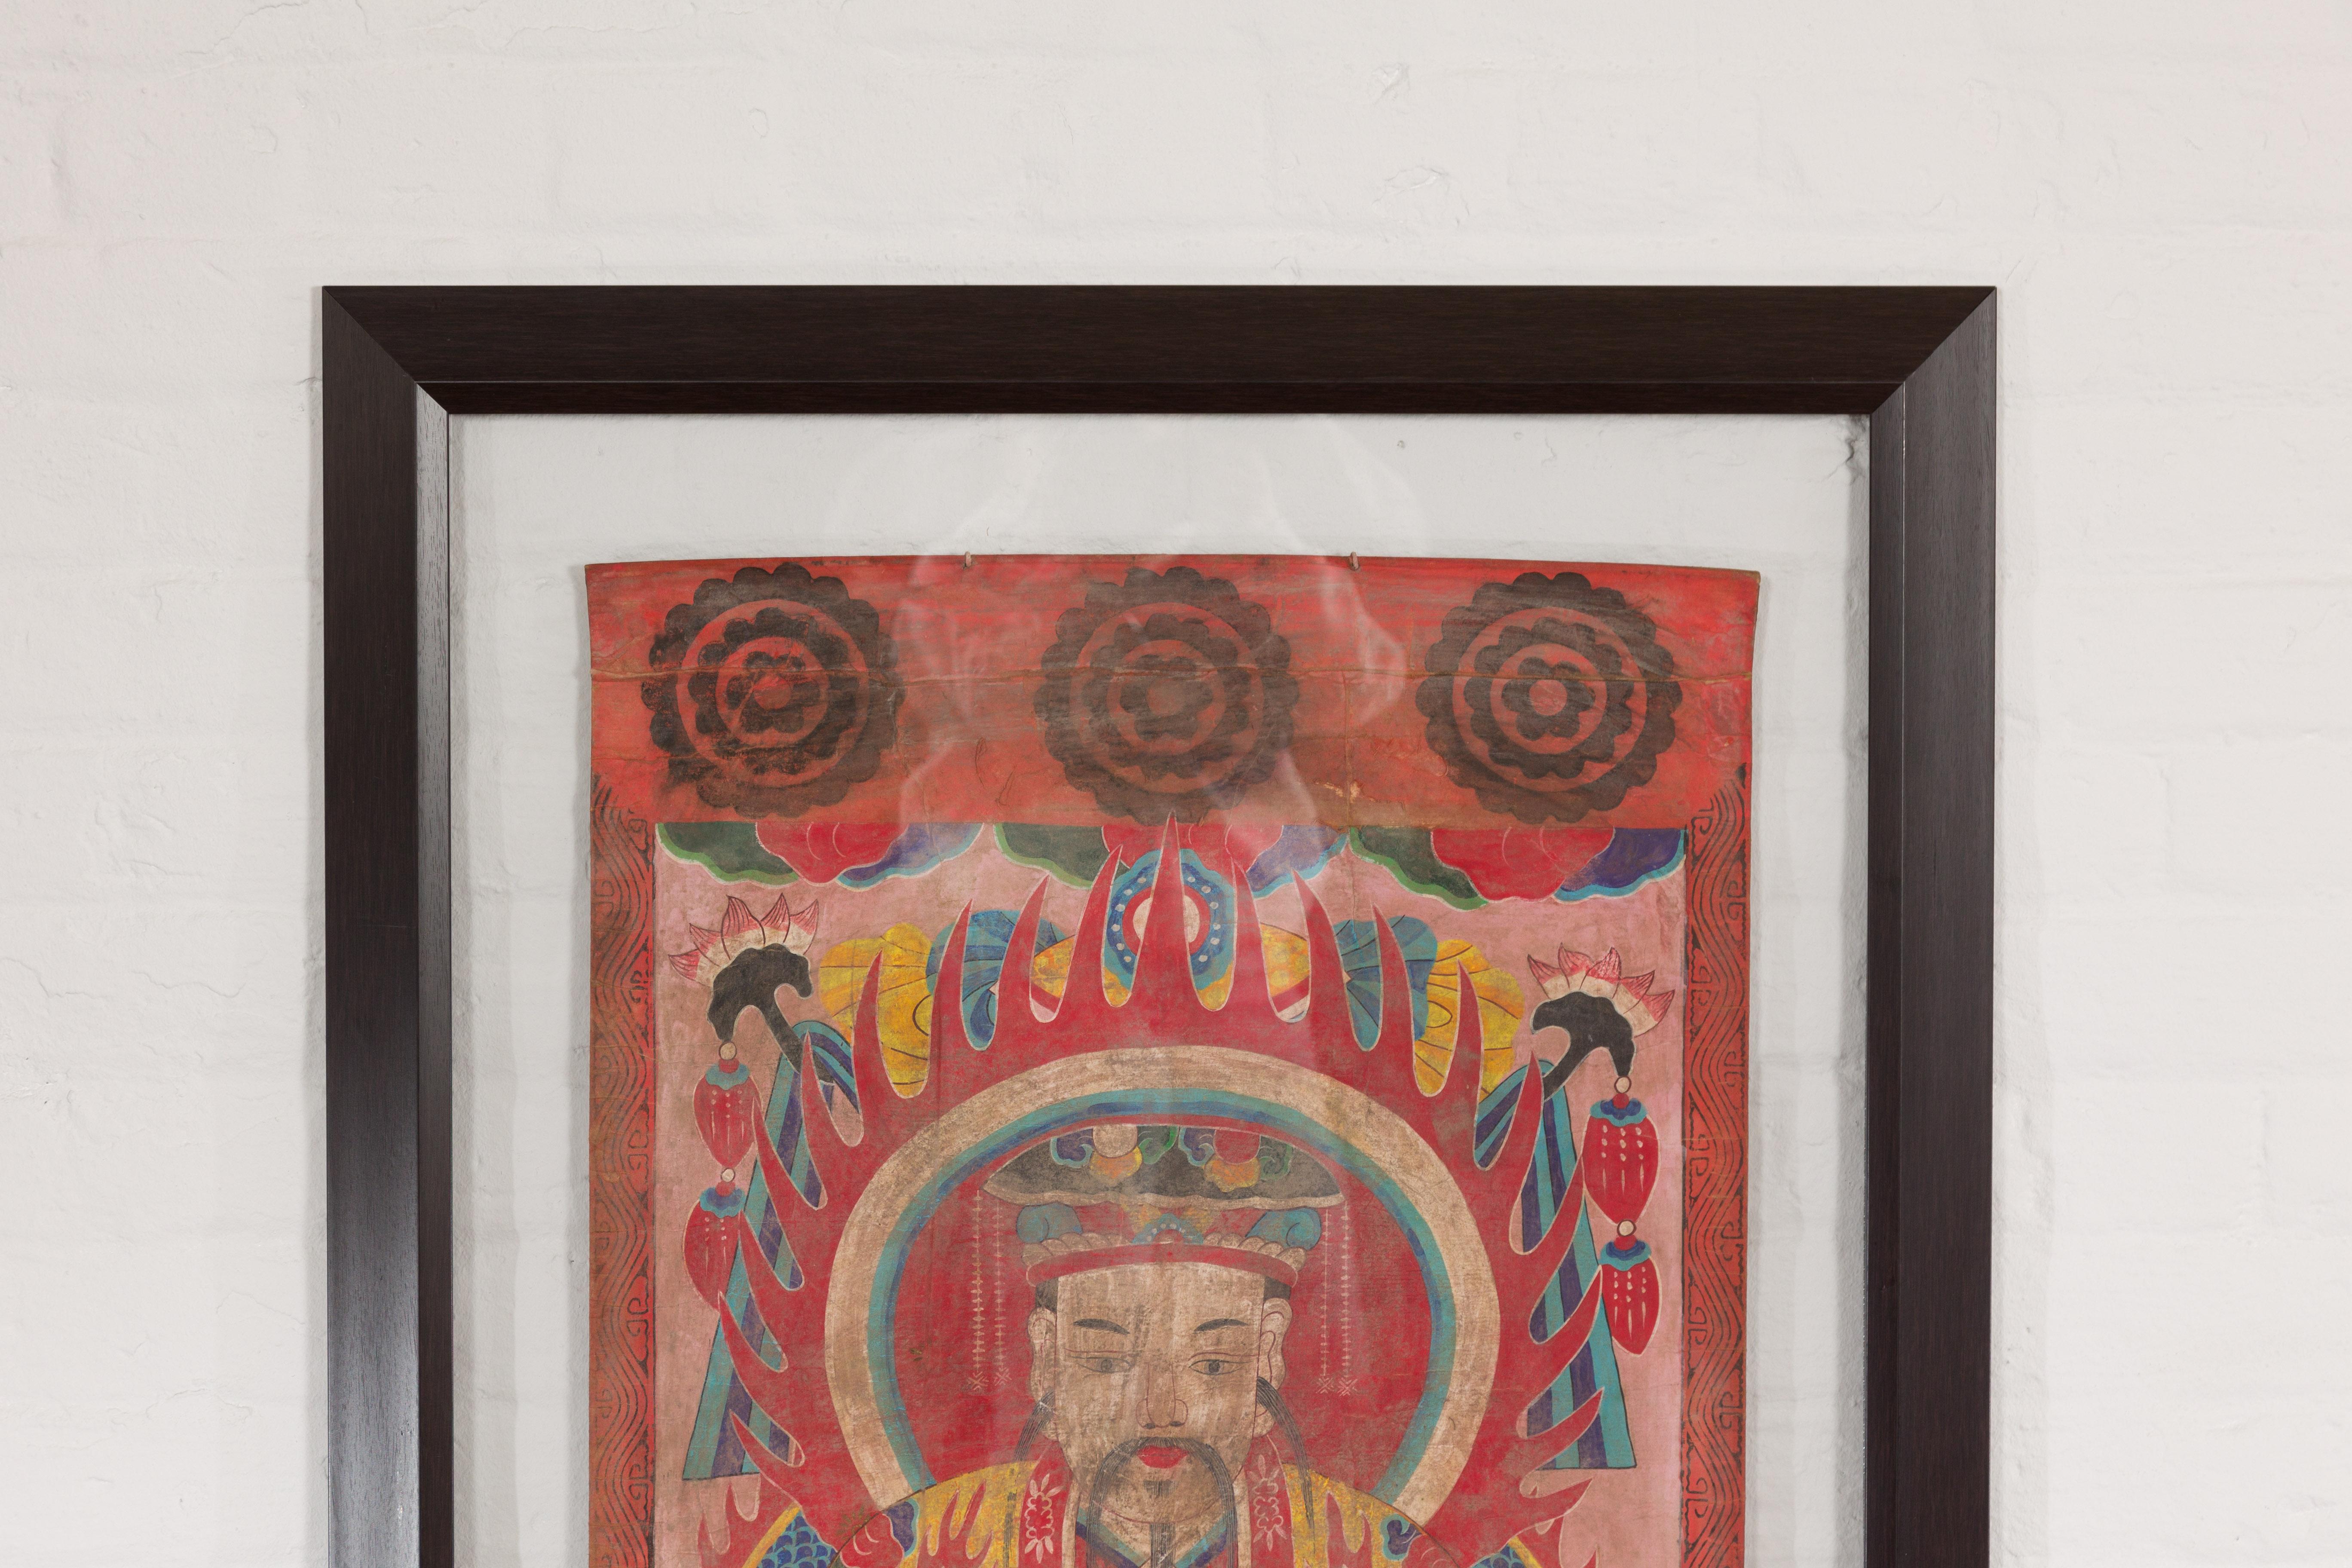 Mandarin Taoist Ceremonial Chinese Scroll Portrait Painting in Custom Frame In Good Condition For Sale In Yonkers, NY